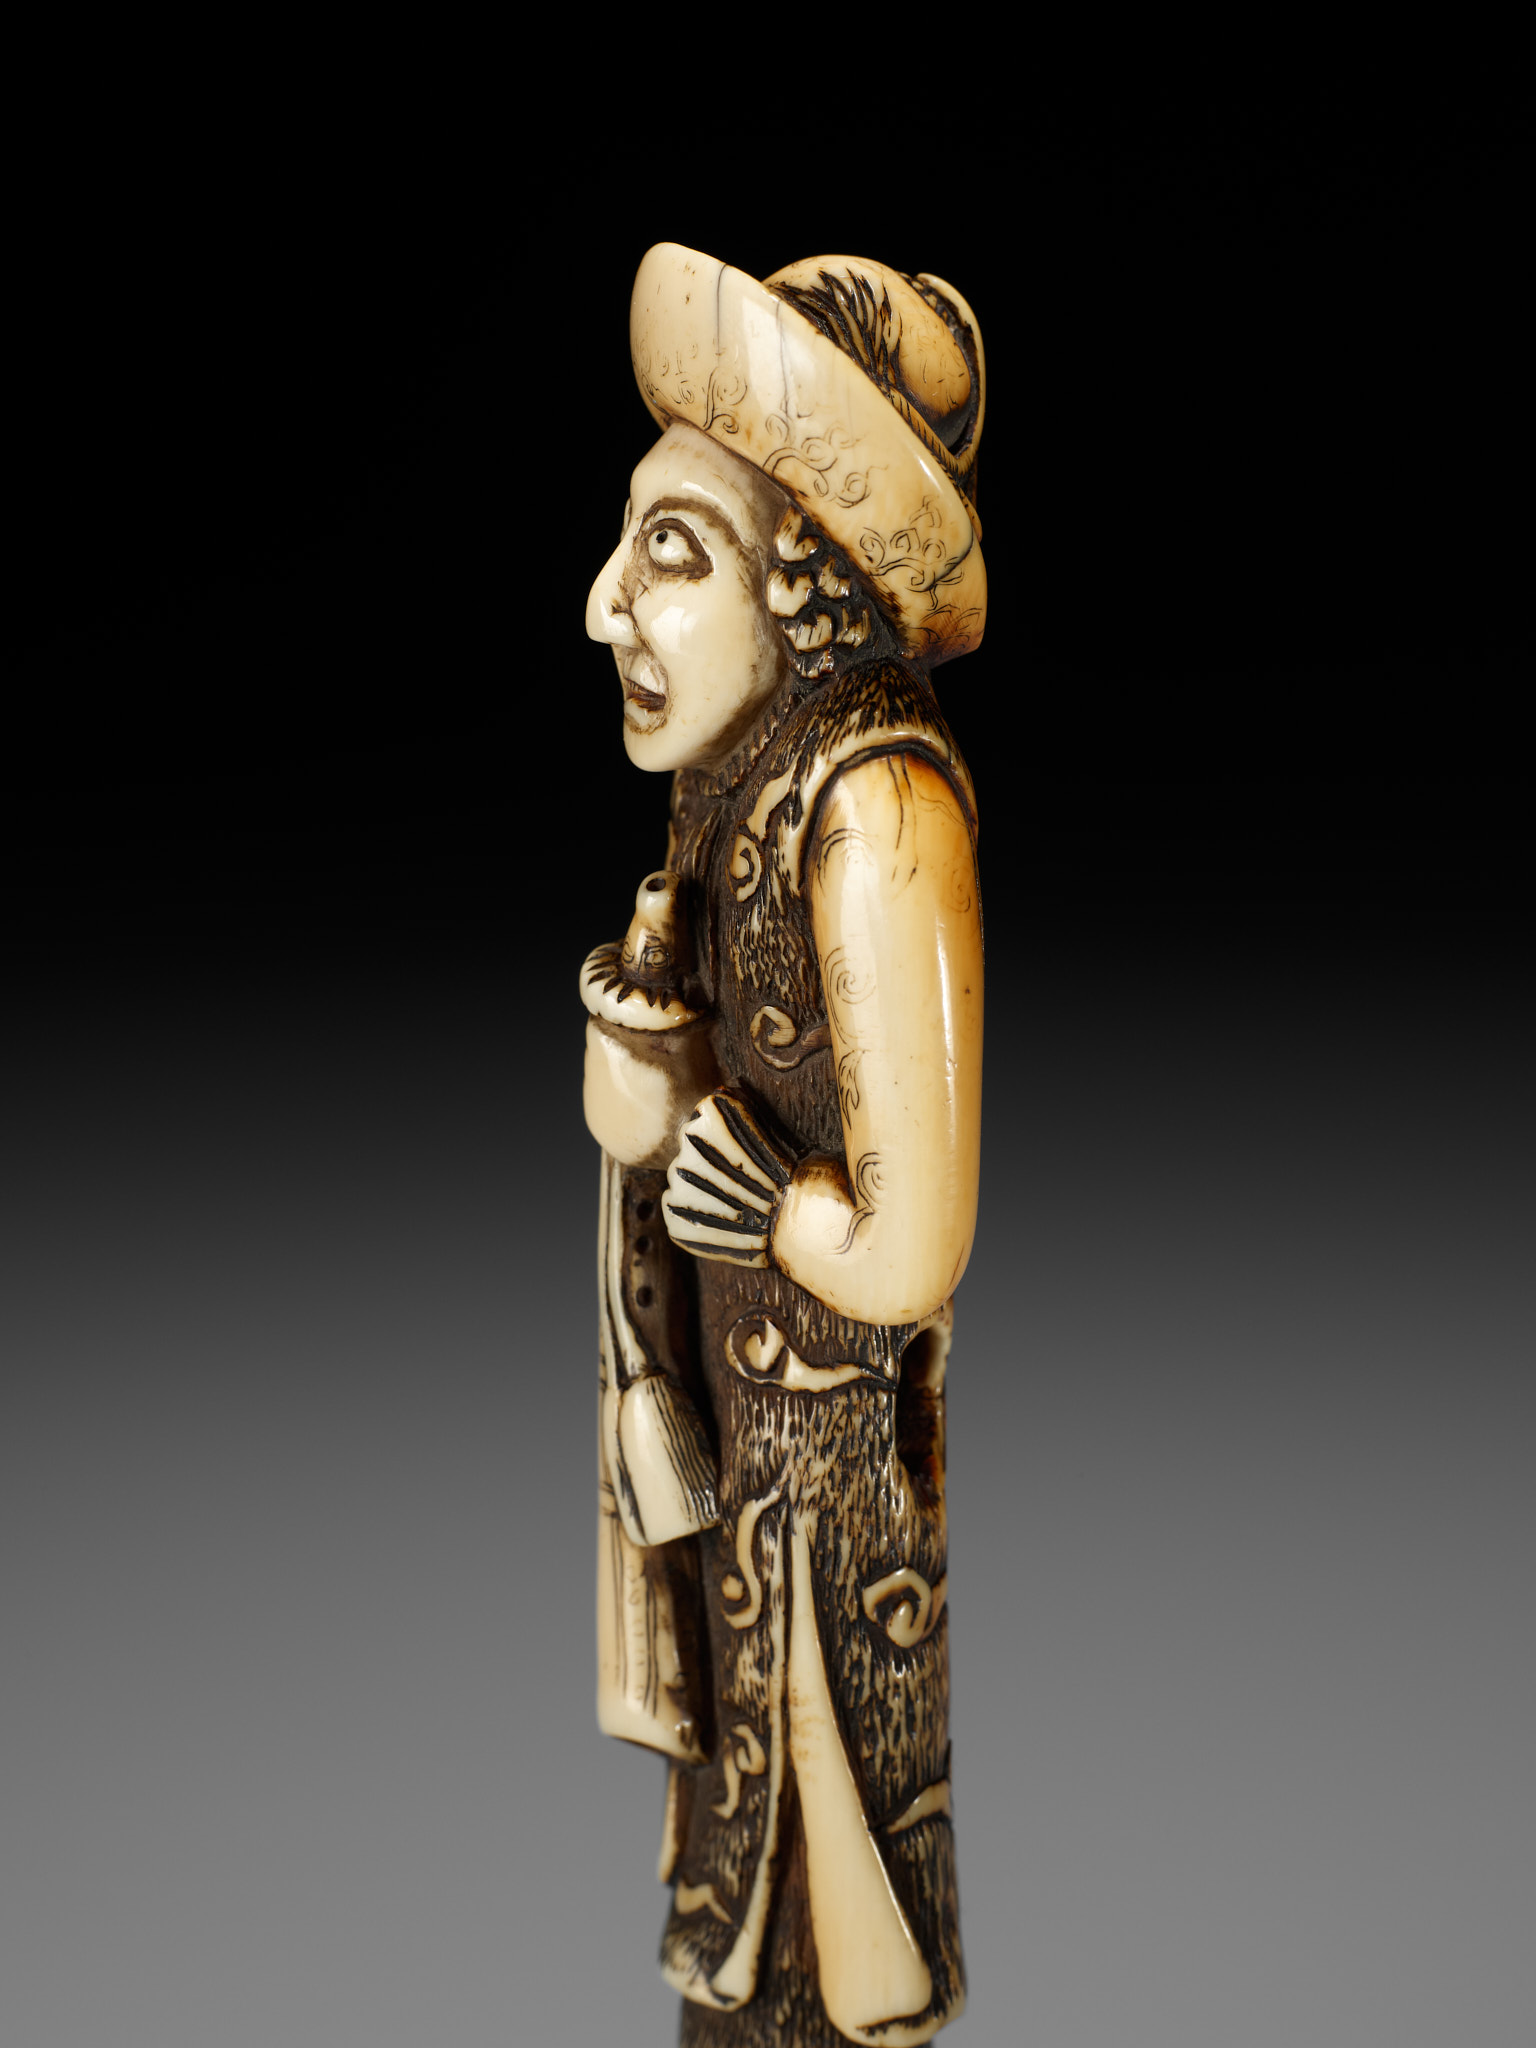 A SUPERB AND LARGE IVORY NETSUKE OF A DUTCHMAN WITH A TRUMPET - Image 18 of 21